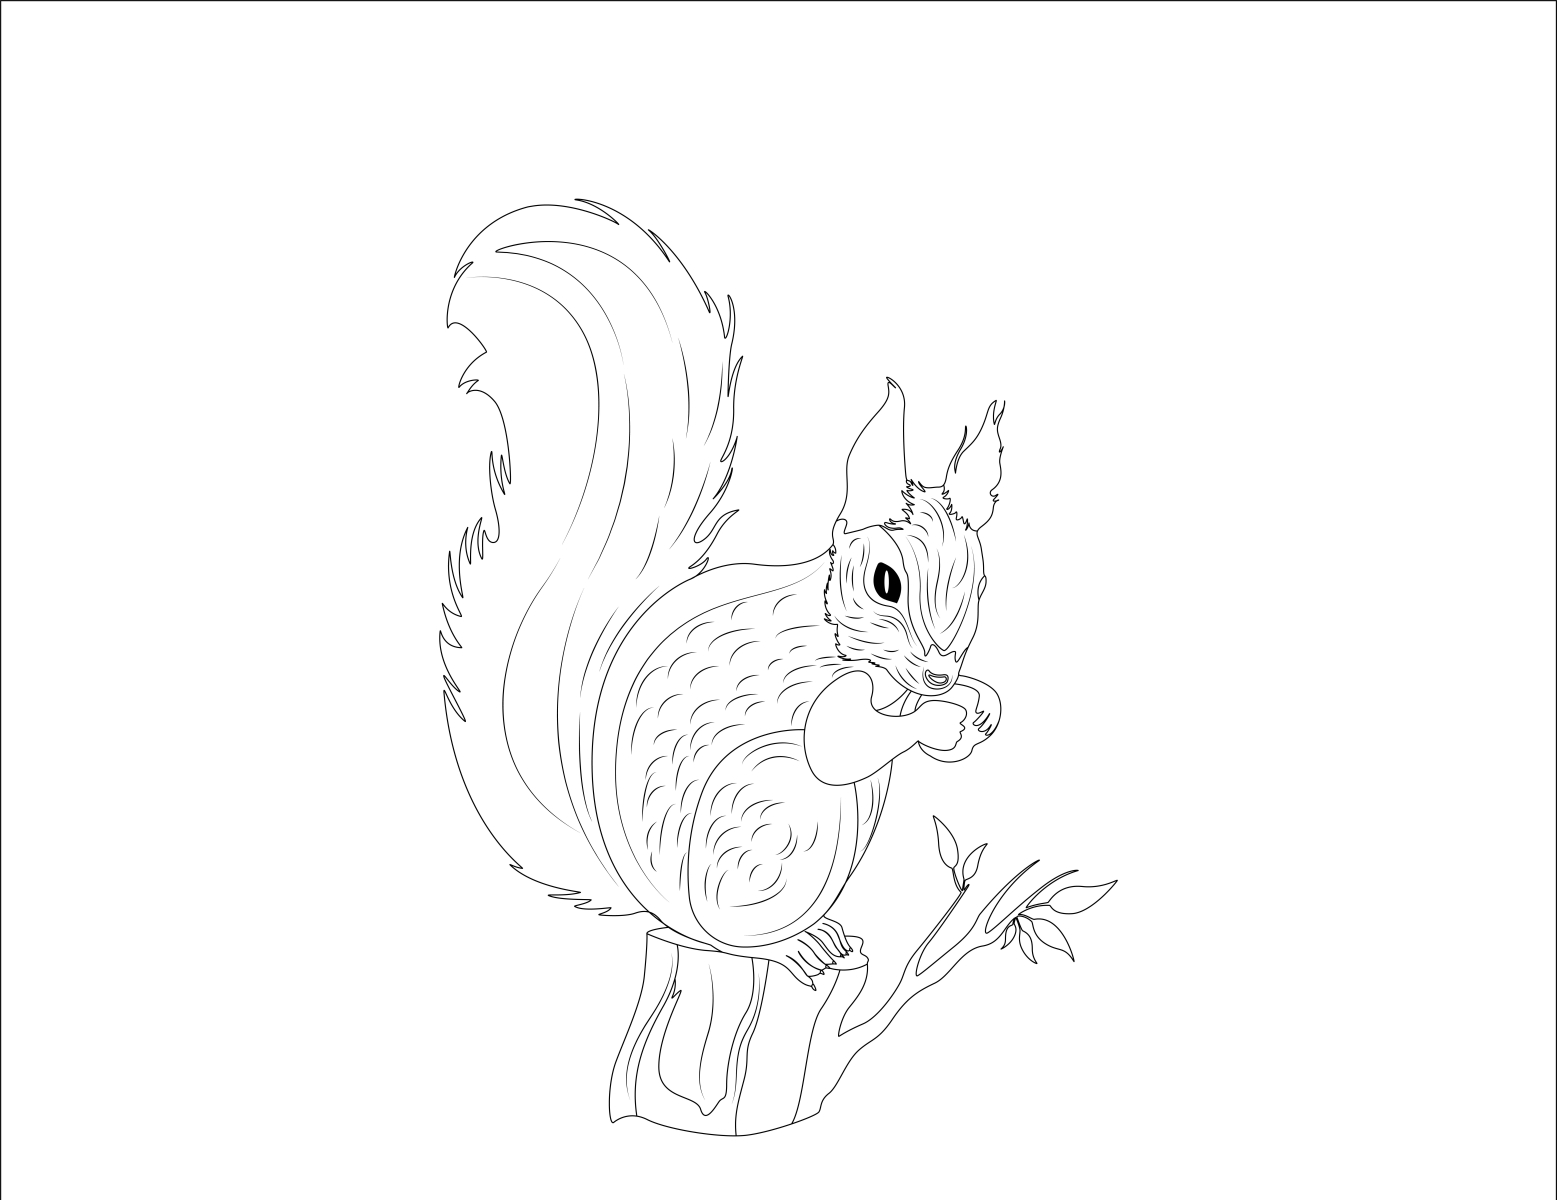 Squirrel One Line Art - Squirrel One Line Drawing - Squirrel Con by one ...